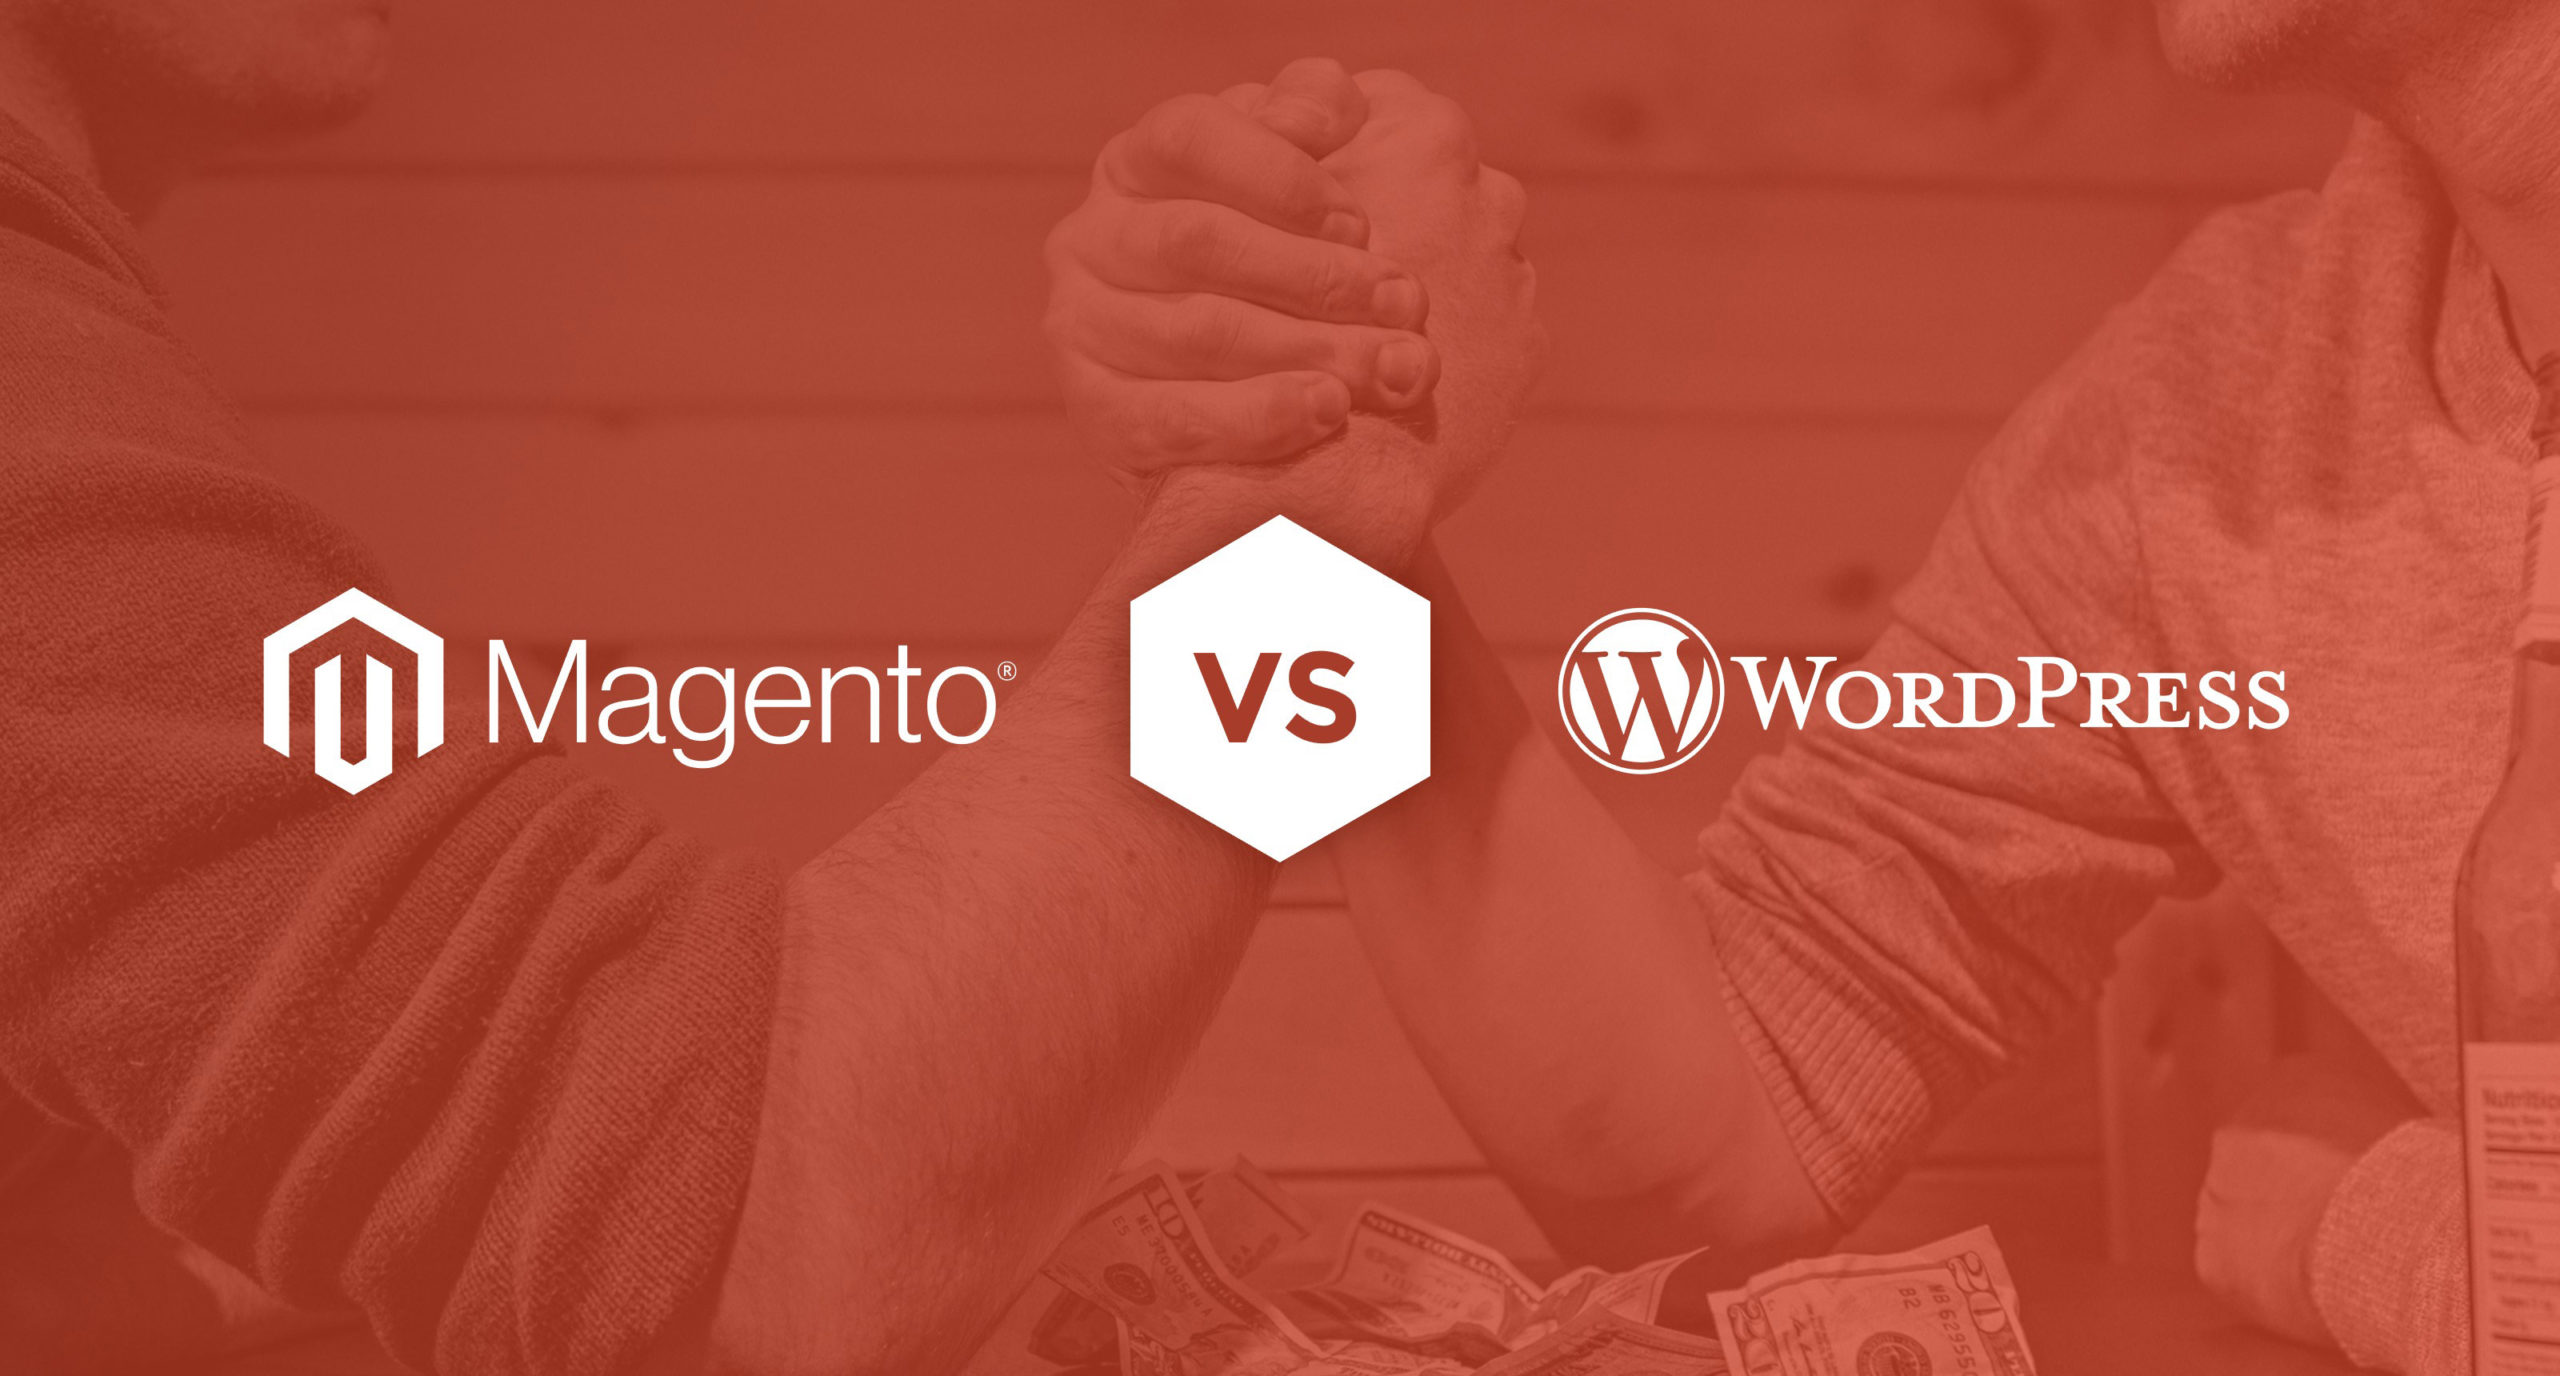 Magento vs WordPress: What’s the Difference?